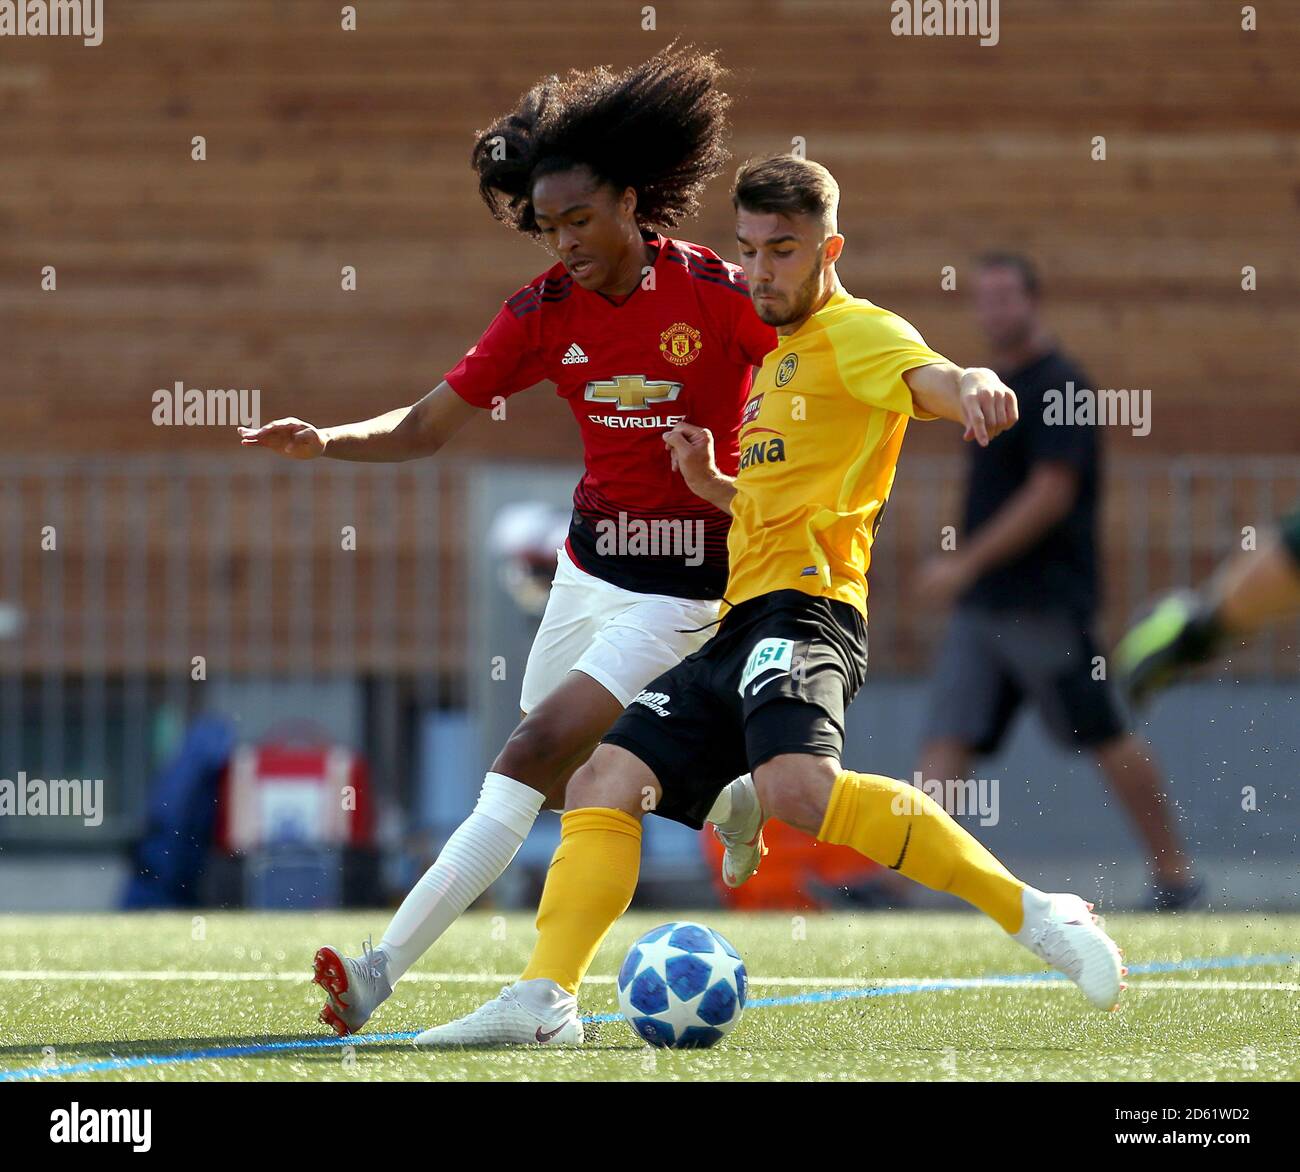 Manchester United's Tahith Chong and BSC Young Boys Kreshnik Hajrizi in action Stock Photo